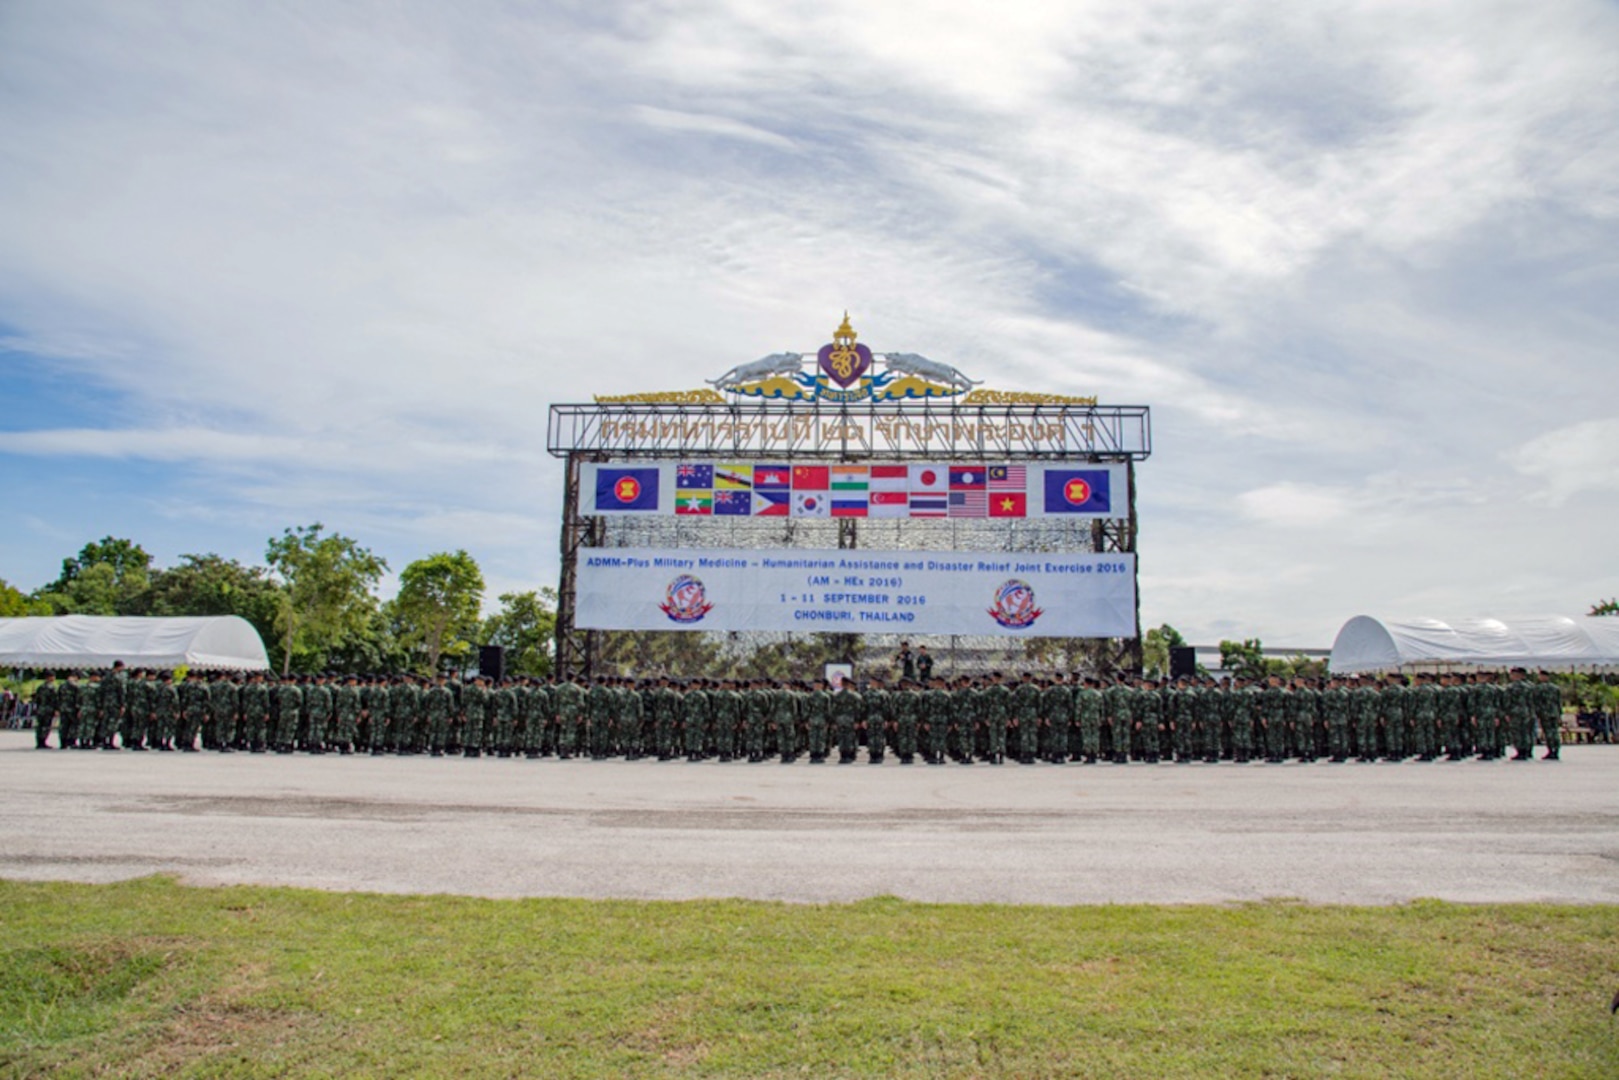 Multinational service members stand in formation during the opening ceremony for ASEAN Exercise 16-3 at 14th Military Circle Airfield, Chonburi Province, Thailand Sept. 5, 2016. AEX 16-3 is a small-scale humanitarian assistance and disaster relief exercise consisting of 18 nations and co-hosted by Thailand, Japan, Lao People’s Democratic Republic and the Russian Federation. It is the third iteration of the ASEAN Defense Ministers Meeting plus multinational exercise program in 2016. 